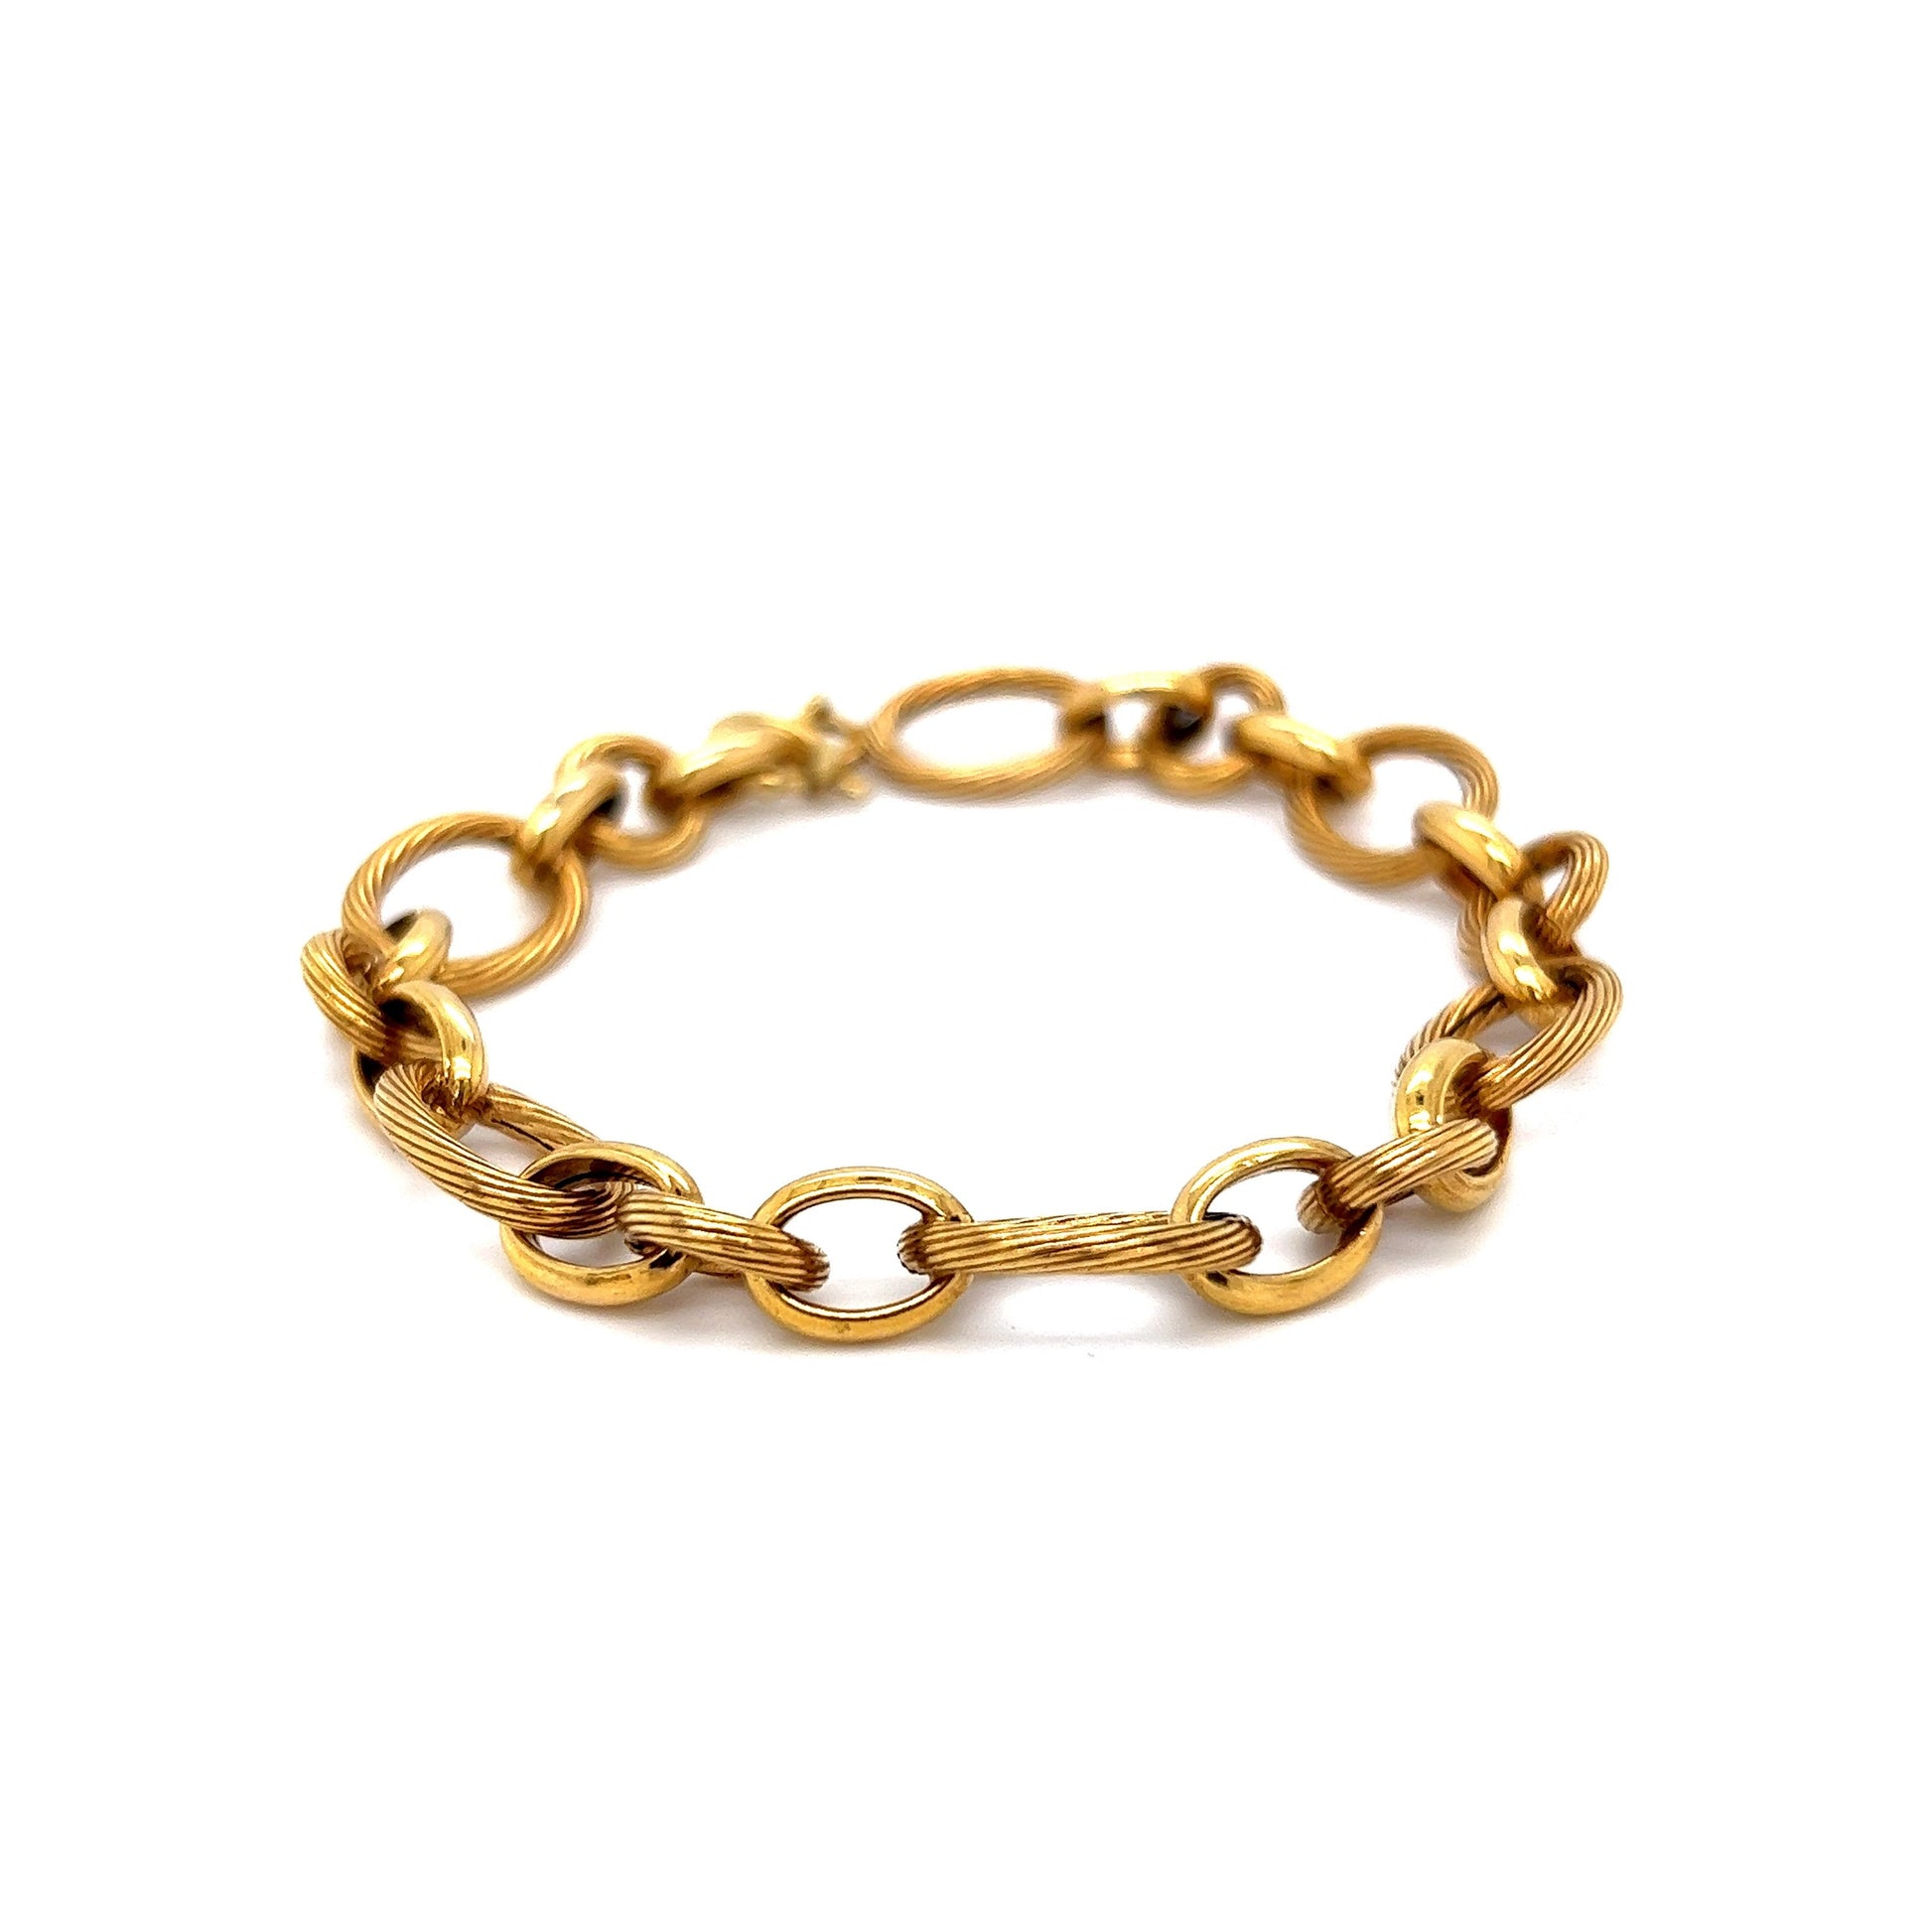 Textured Oval & Round Link Bracelet in 14k Yellow Gold